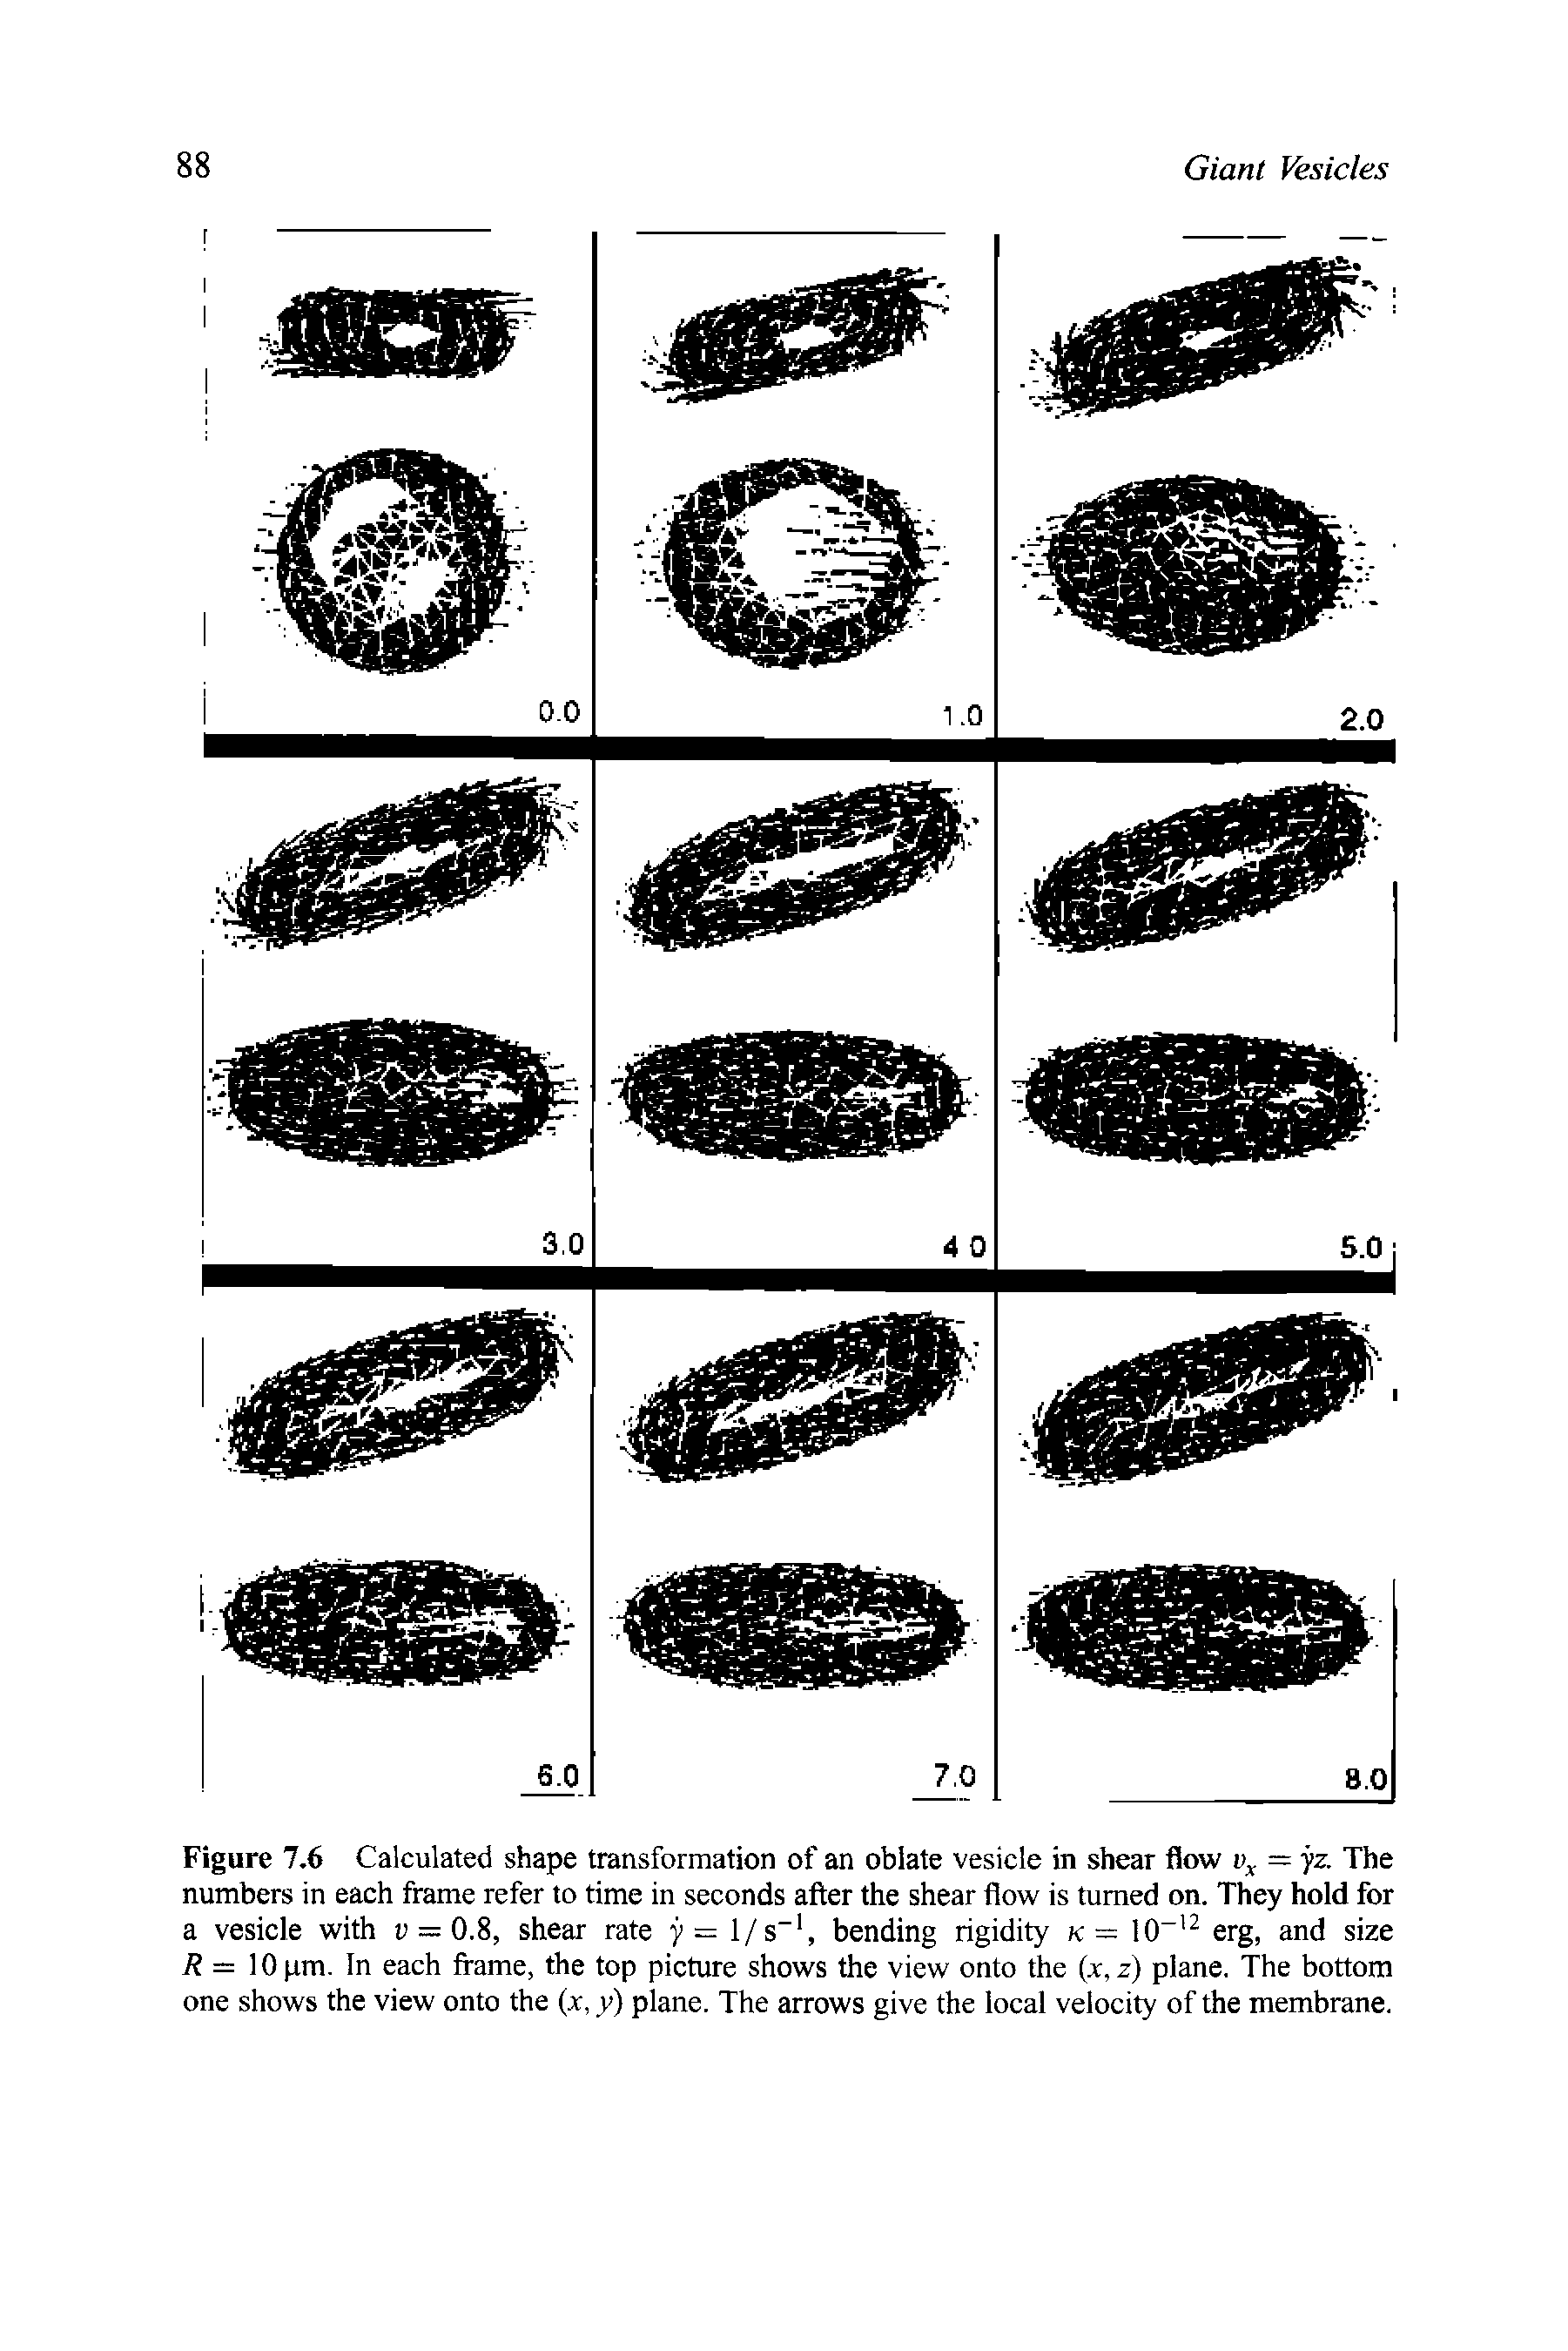 Figure 7.6 Calculated shape transformation of an oblate vesicle in shear flow — yz. The numbers in each frame refer to time in seconds after the shear flow is turned on. They hold for a vesicle with i> = 0.8, shear rate y = 1/s", bending rigidity k— 10 erg, and size R = 10 pm. In each frame, the top picture shows the view onto the (x, z) plane. The bottom one shows the view onto the (x, y) plane. The arrows give the local velocity of the membrane.